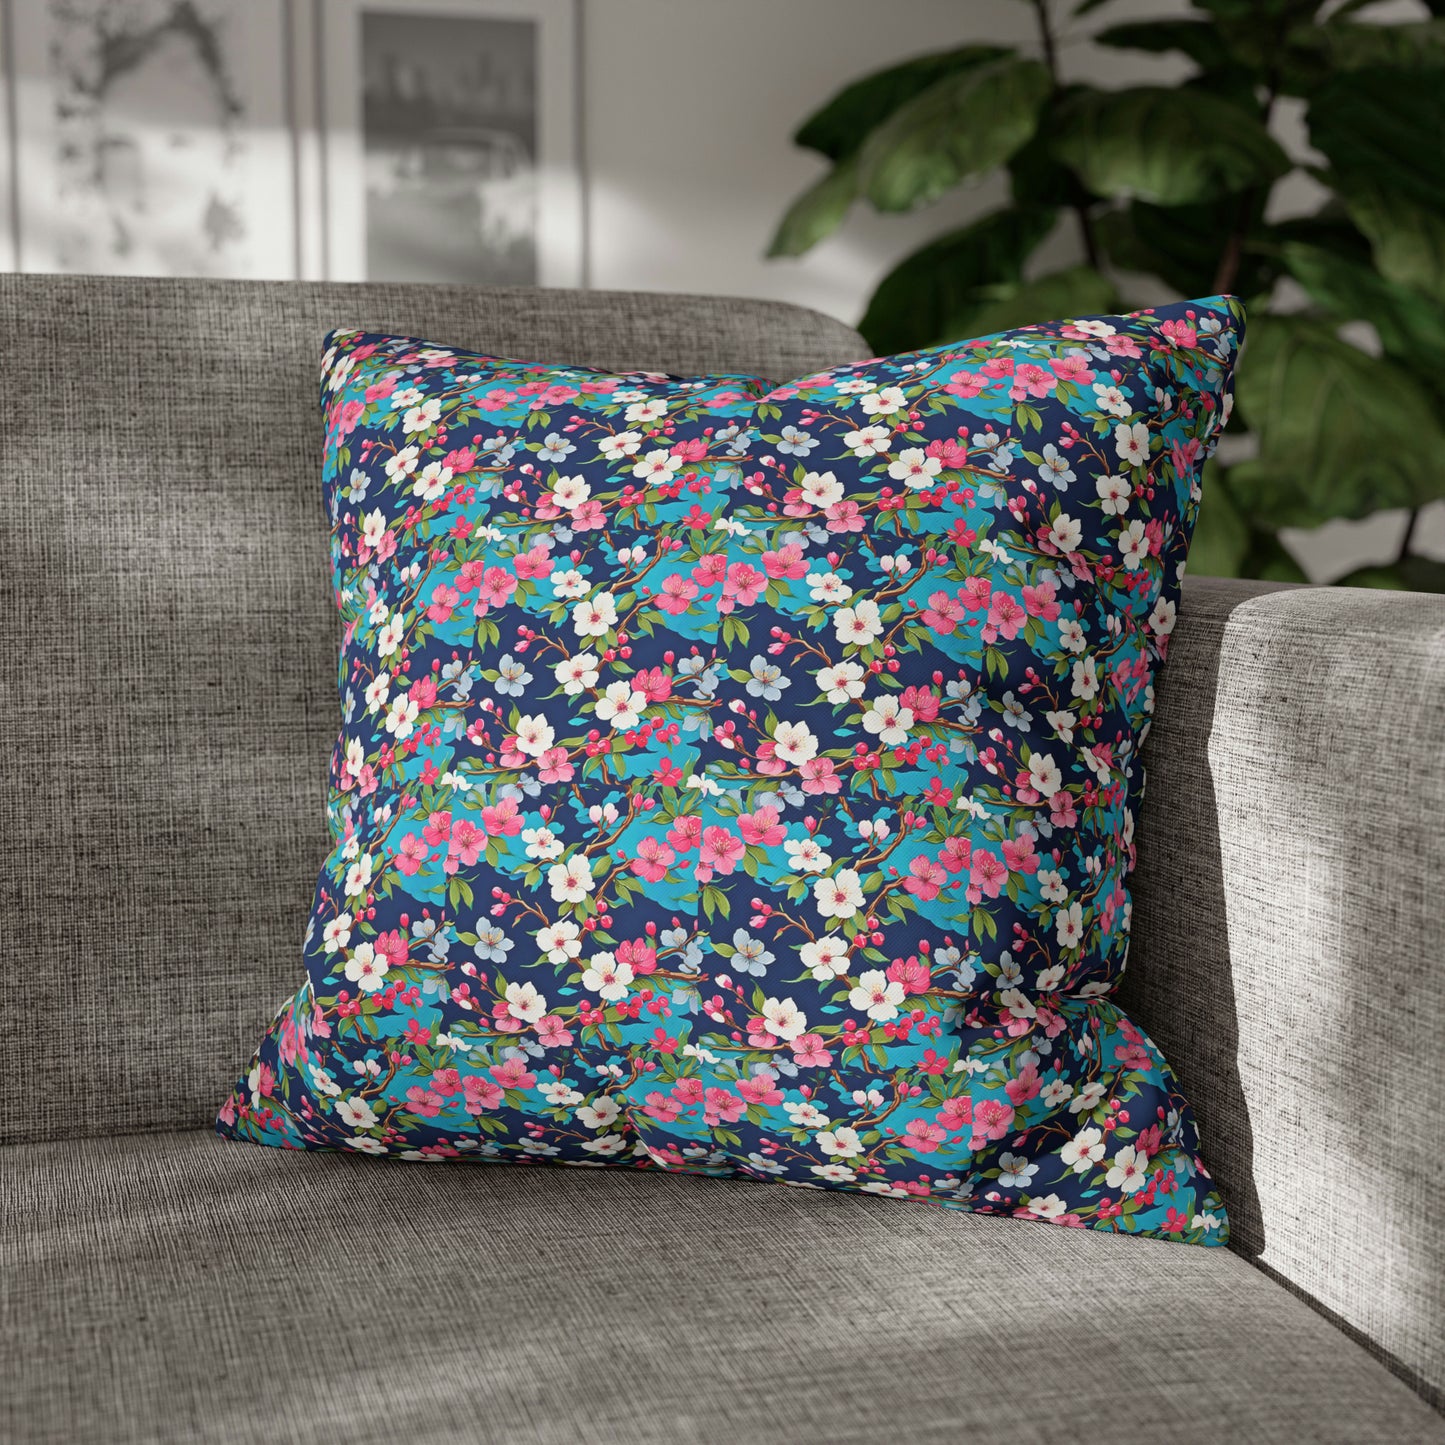 Cherry Blossoms Japanese Floral Decorative Spun Polyester Pillow Cover